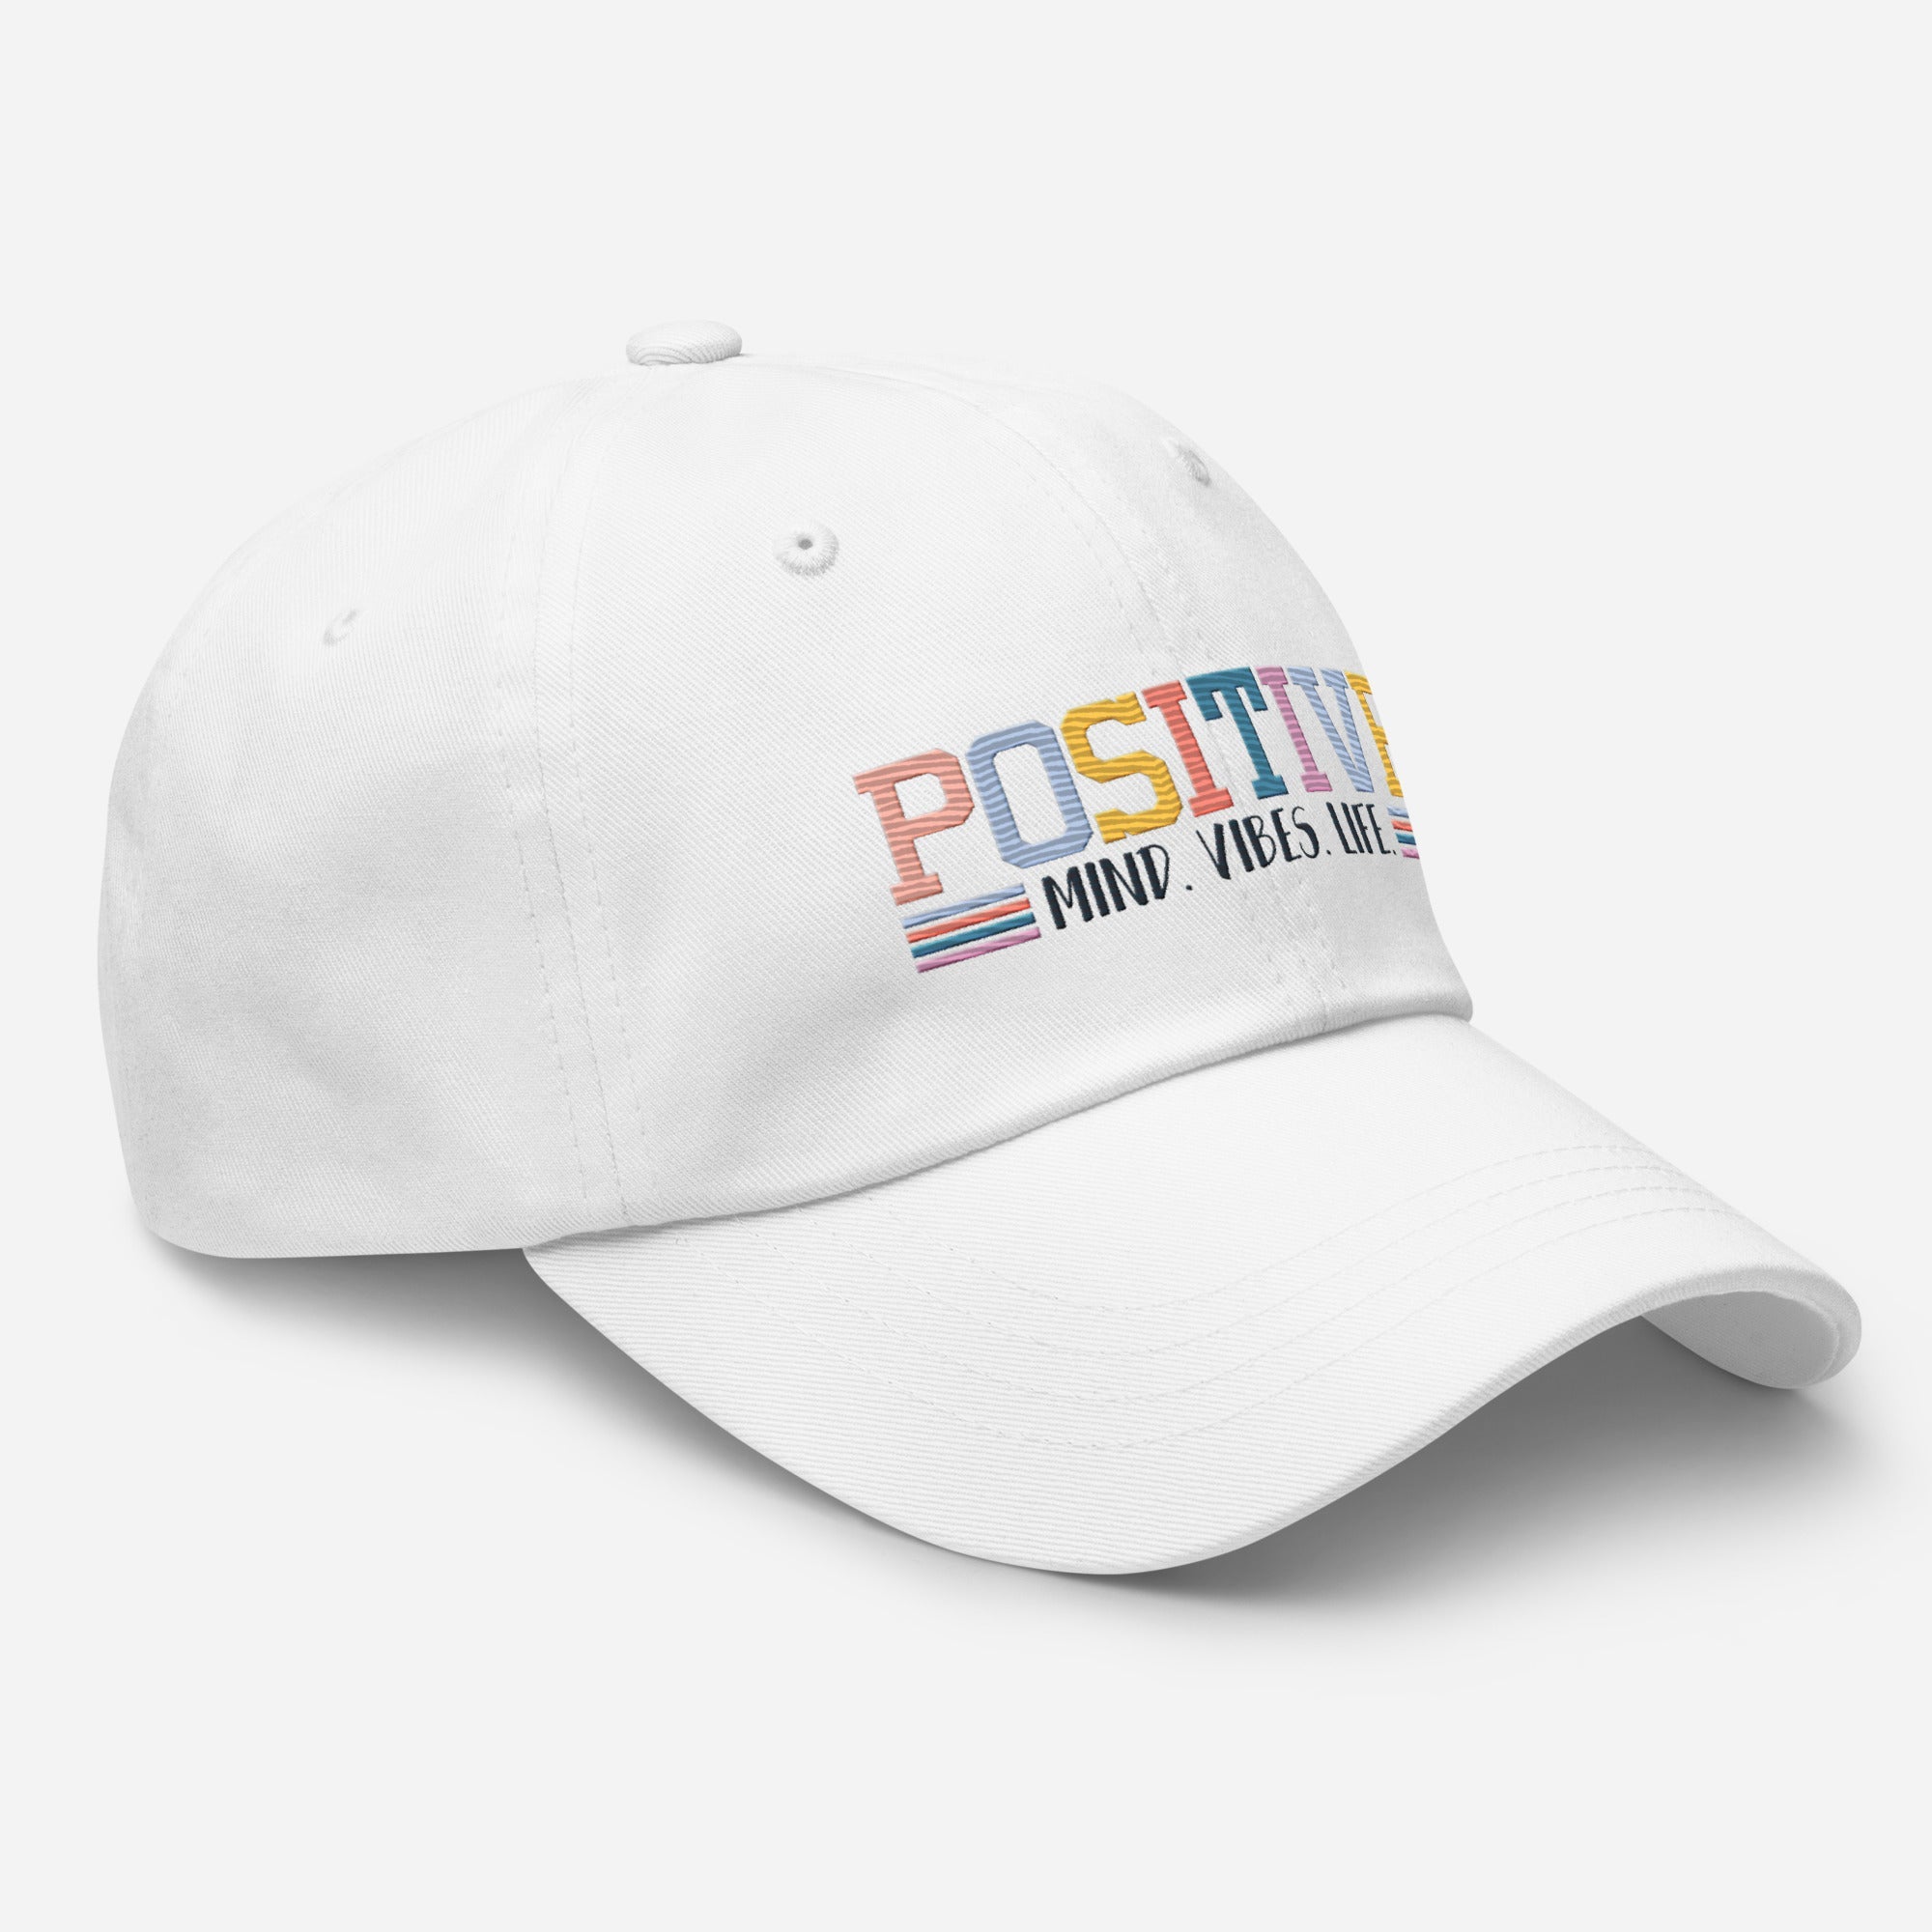 Positive Mind Vibes Life Embroidered Dad Hat - The Kindness Cause